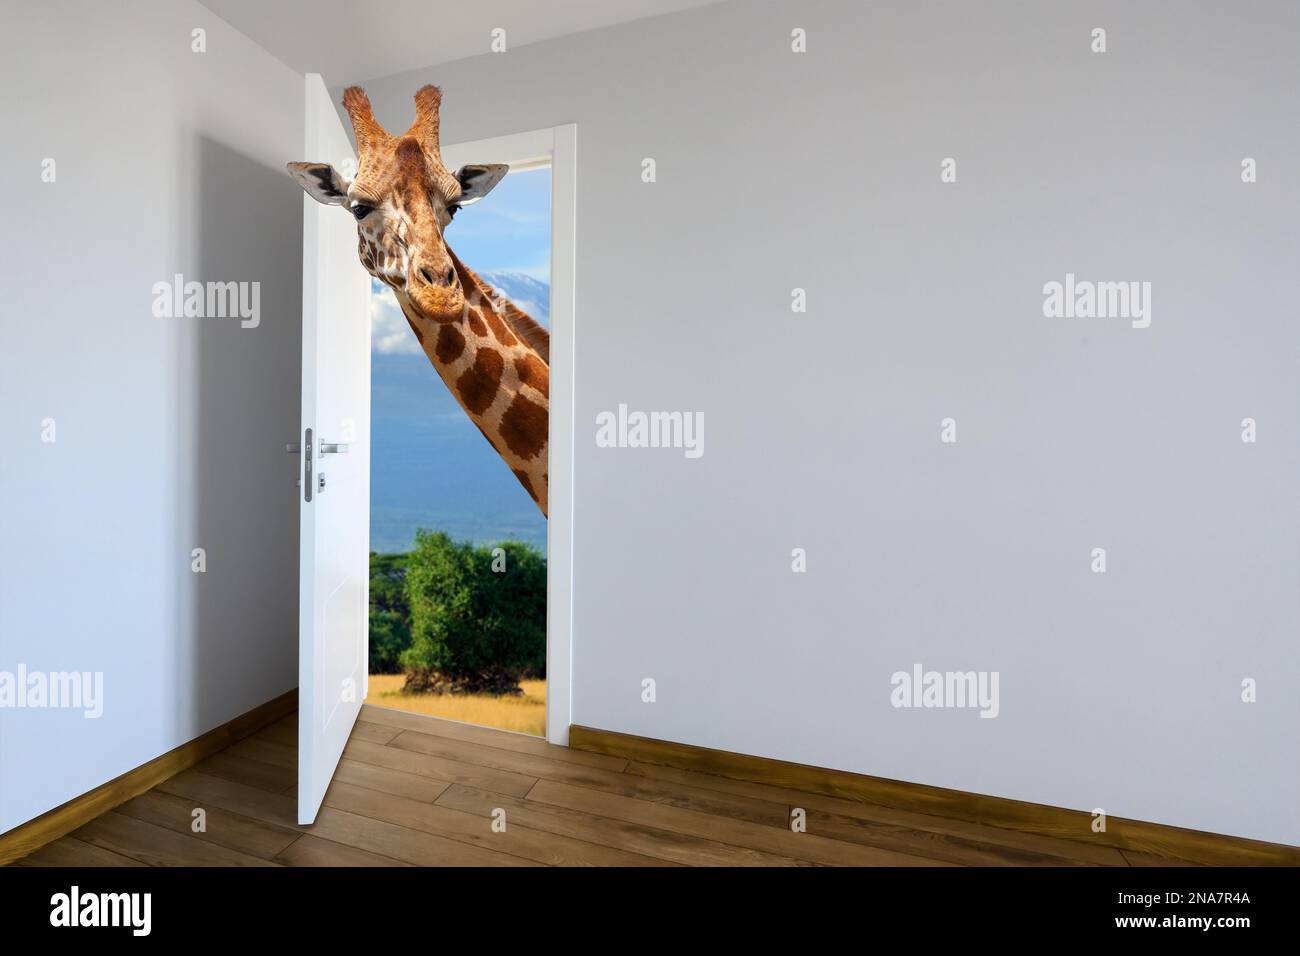 Giraffe entering a door. Animal watching from a wall. Kids decoration room. Сhild's imagination or a dream Stock Photo